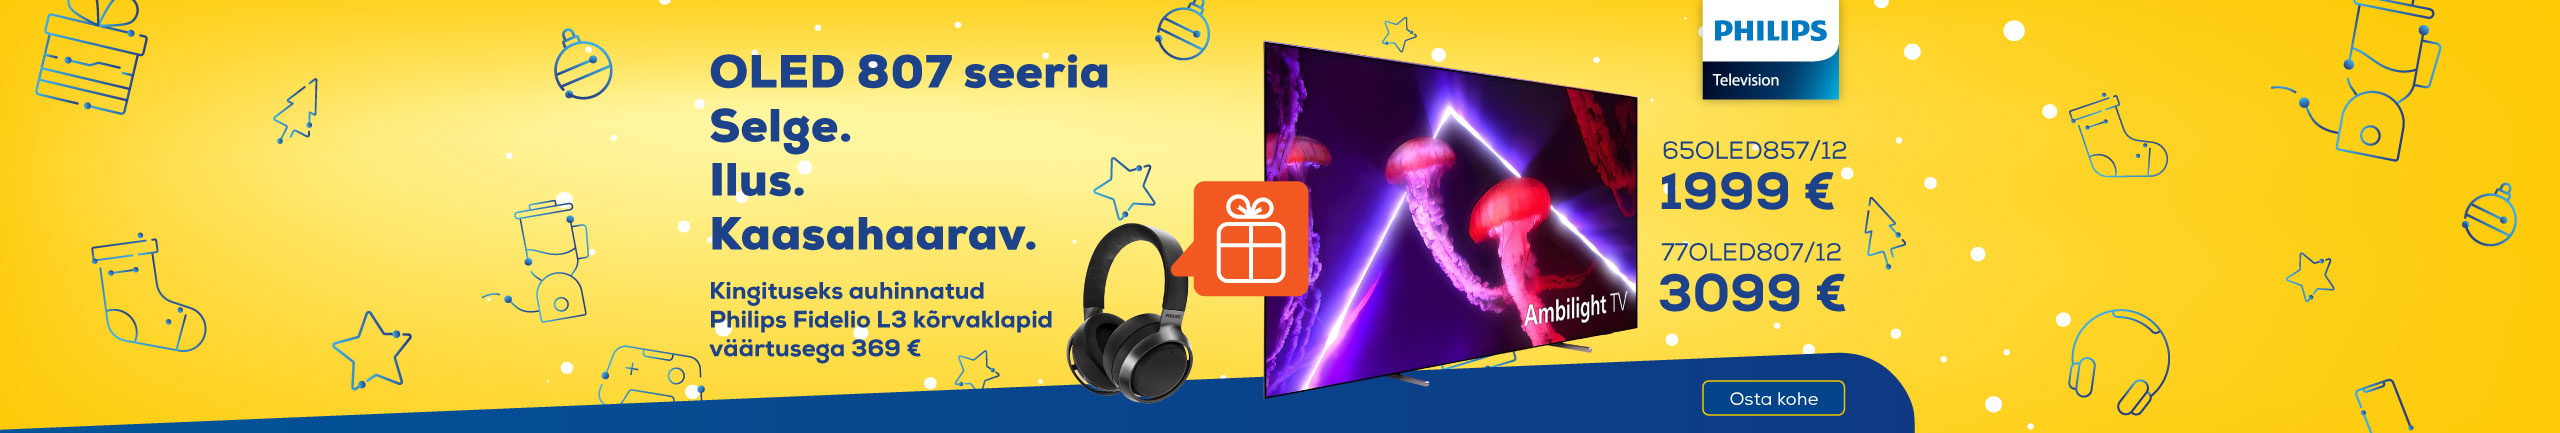 Get Philips Fidelio L3 headphones as a complimentary gift with OLED 807 series TV!